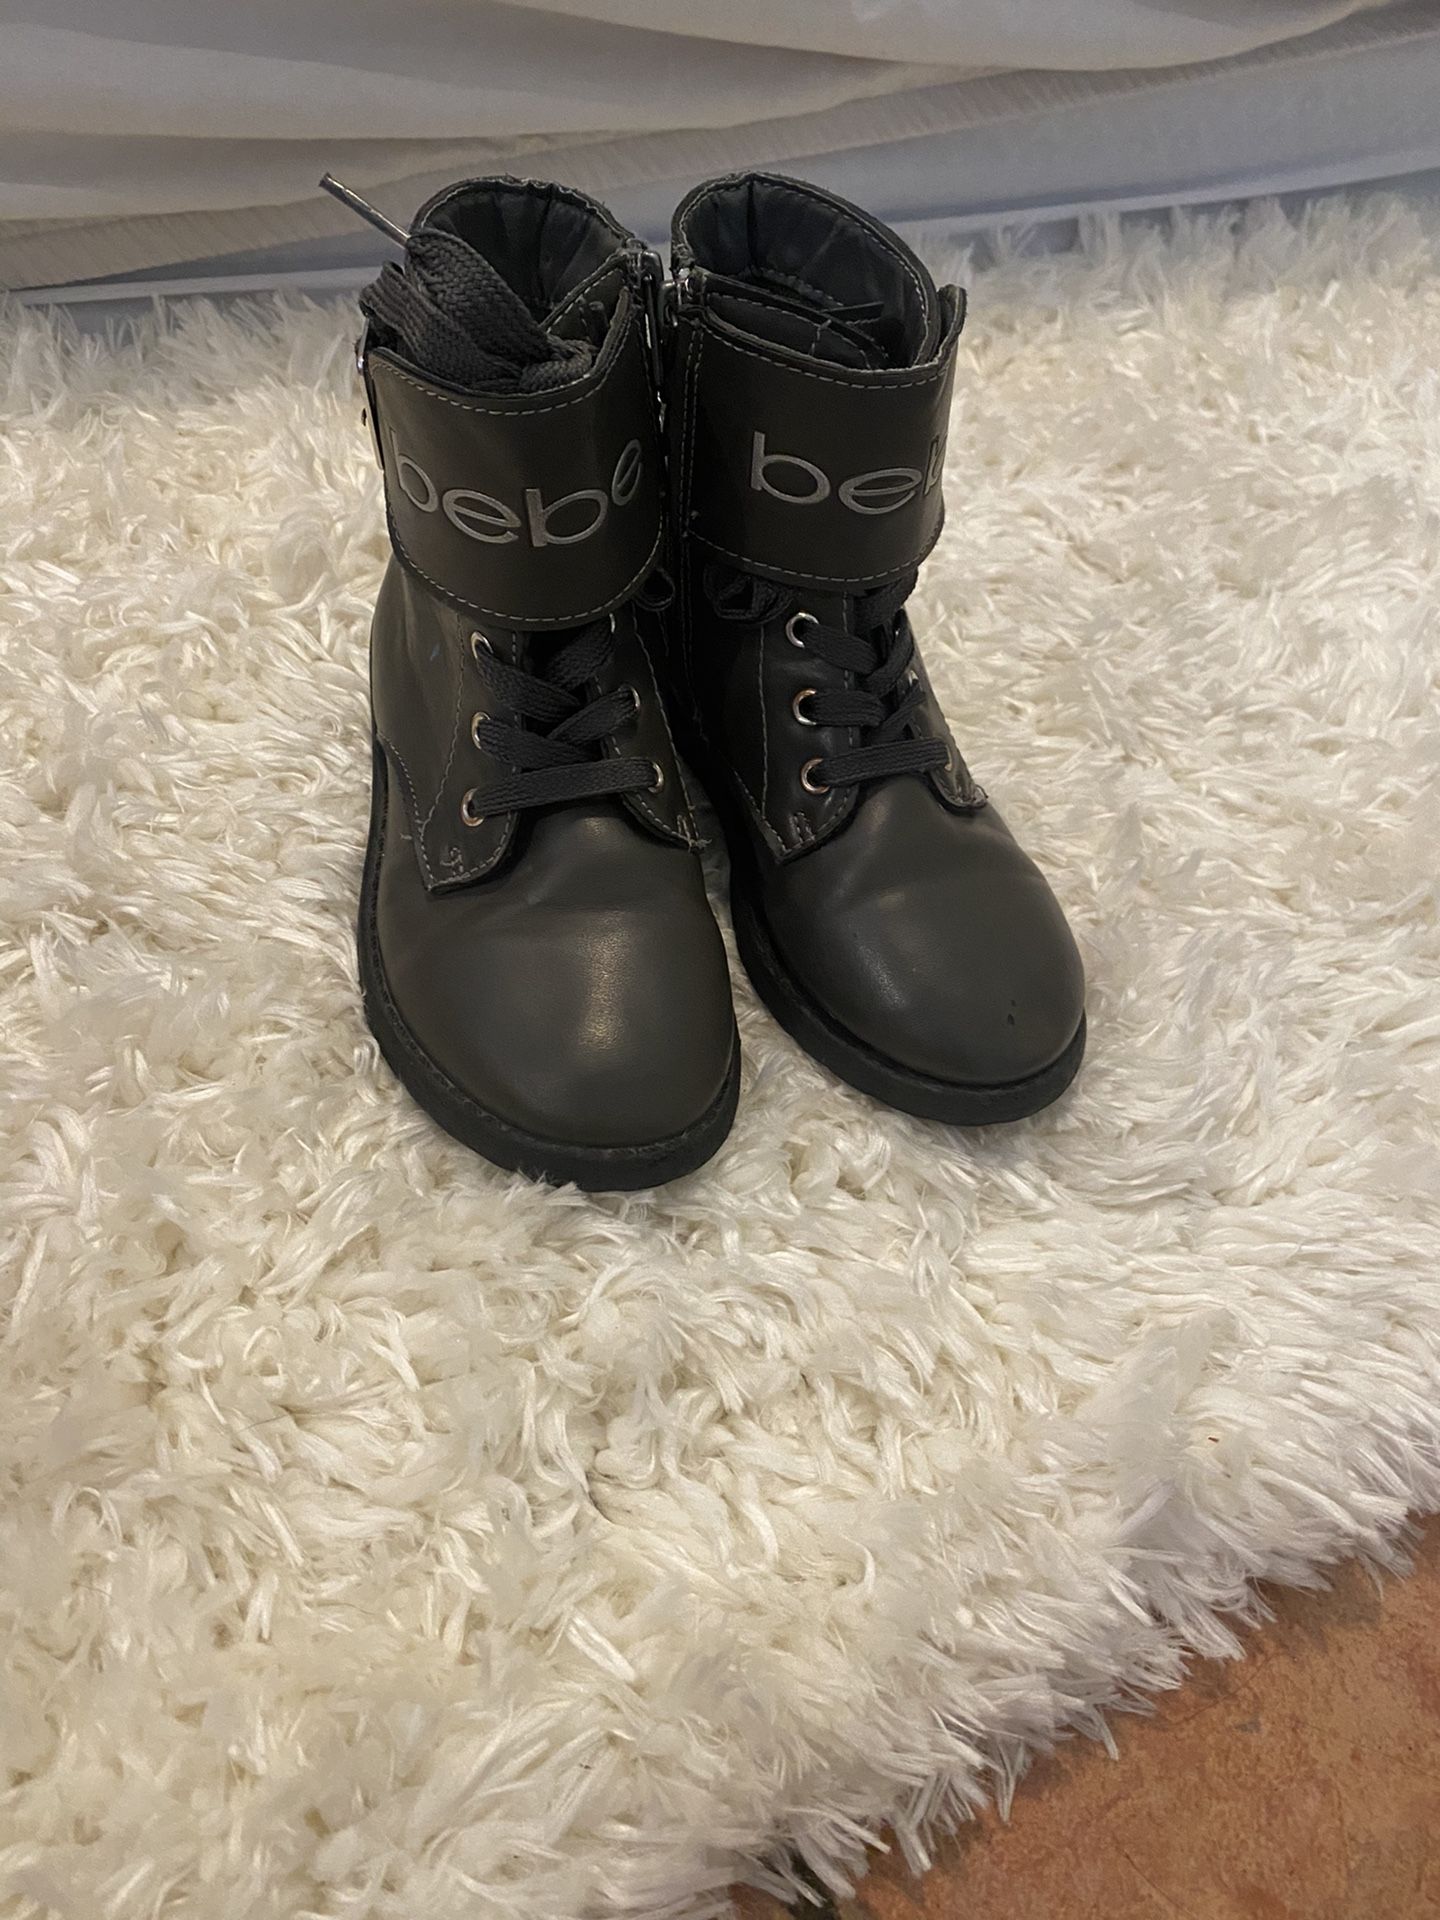 Girls Size 11 BEBE Boots 